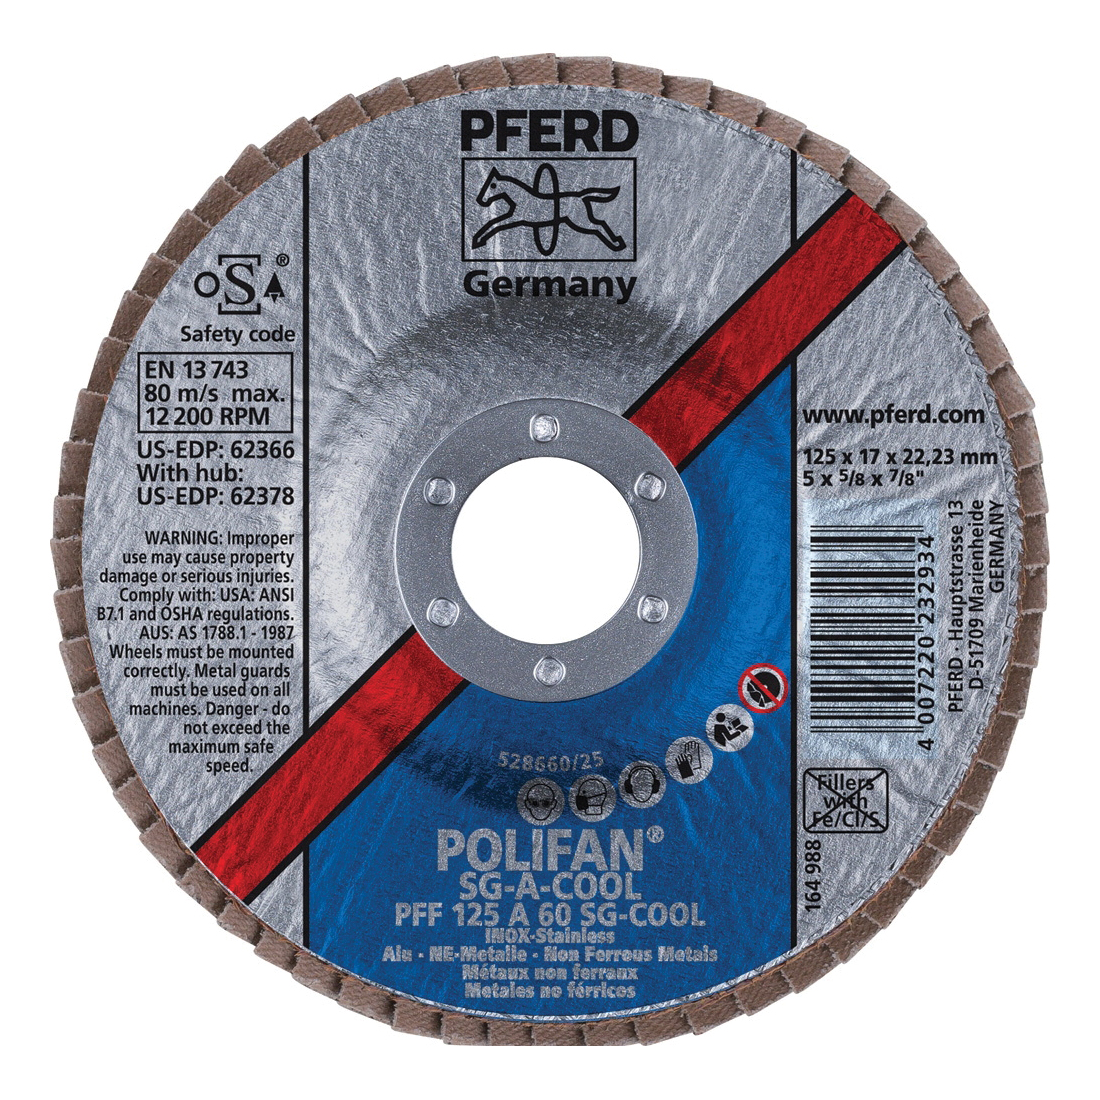 PFERD Polifan® 62366 Performance Line SG A-COOL Unthreaded Coated Abrasive Flap Disc, 5 in Dia, 7/8 in Center Hole, 60 Grit, Aluminum Oxide Abrasive, Type 27 Flat Disc